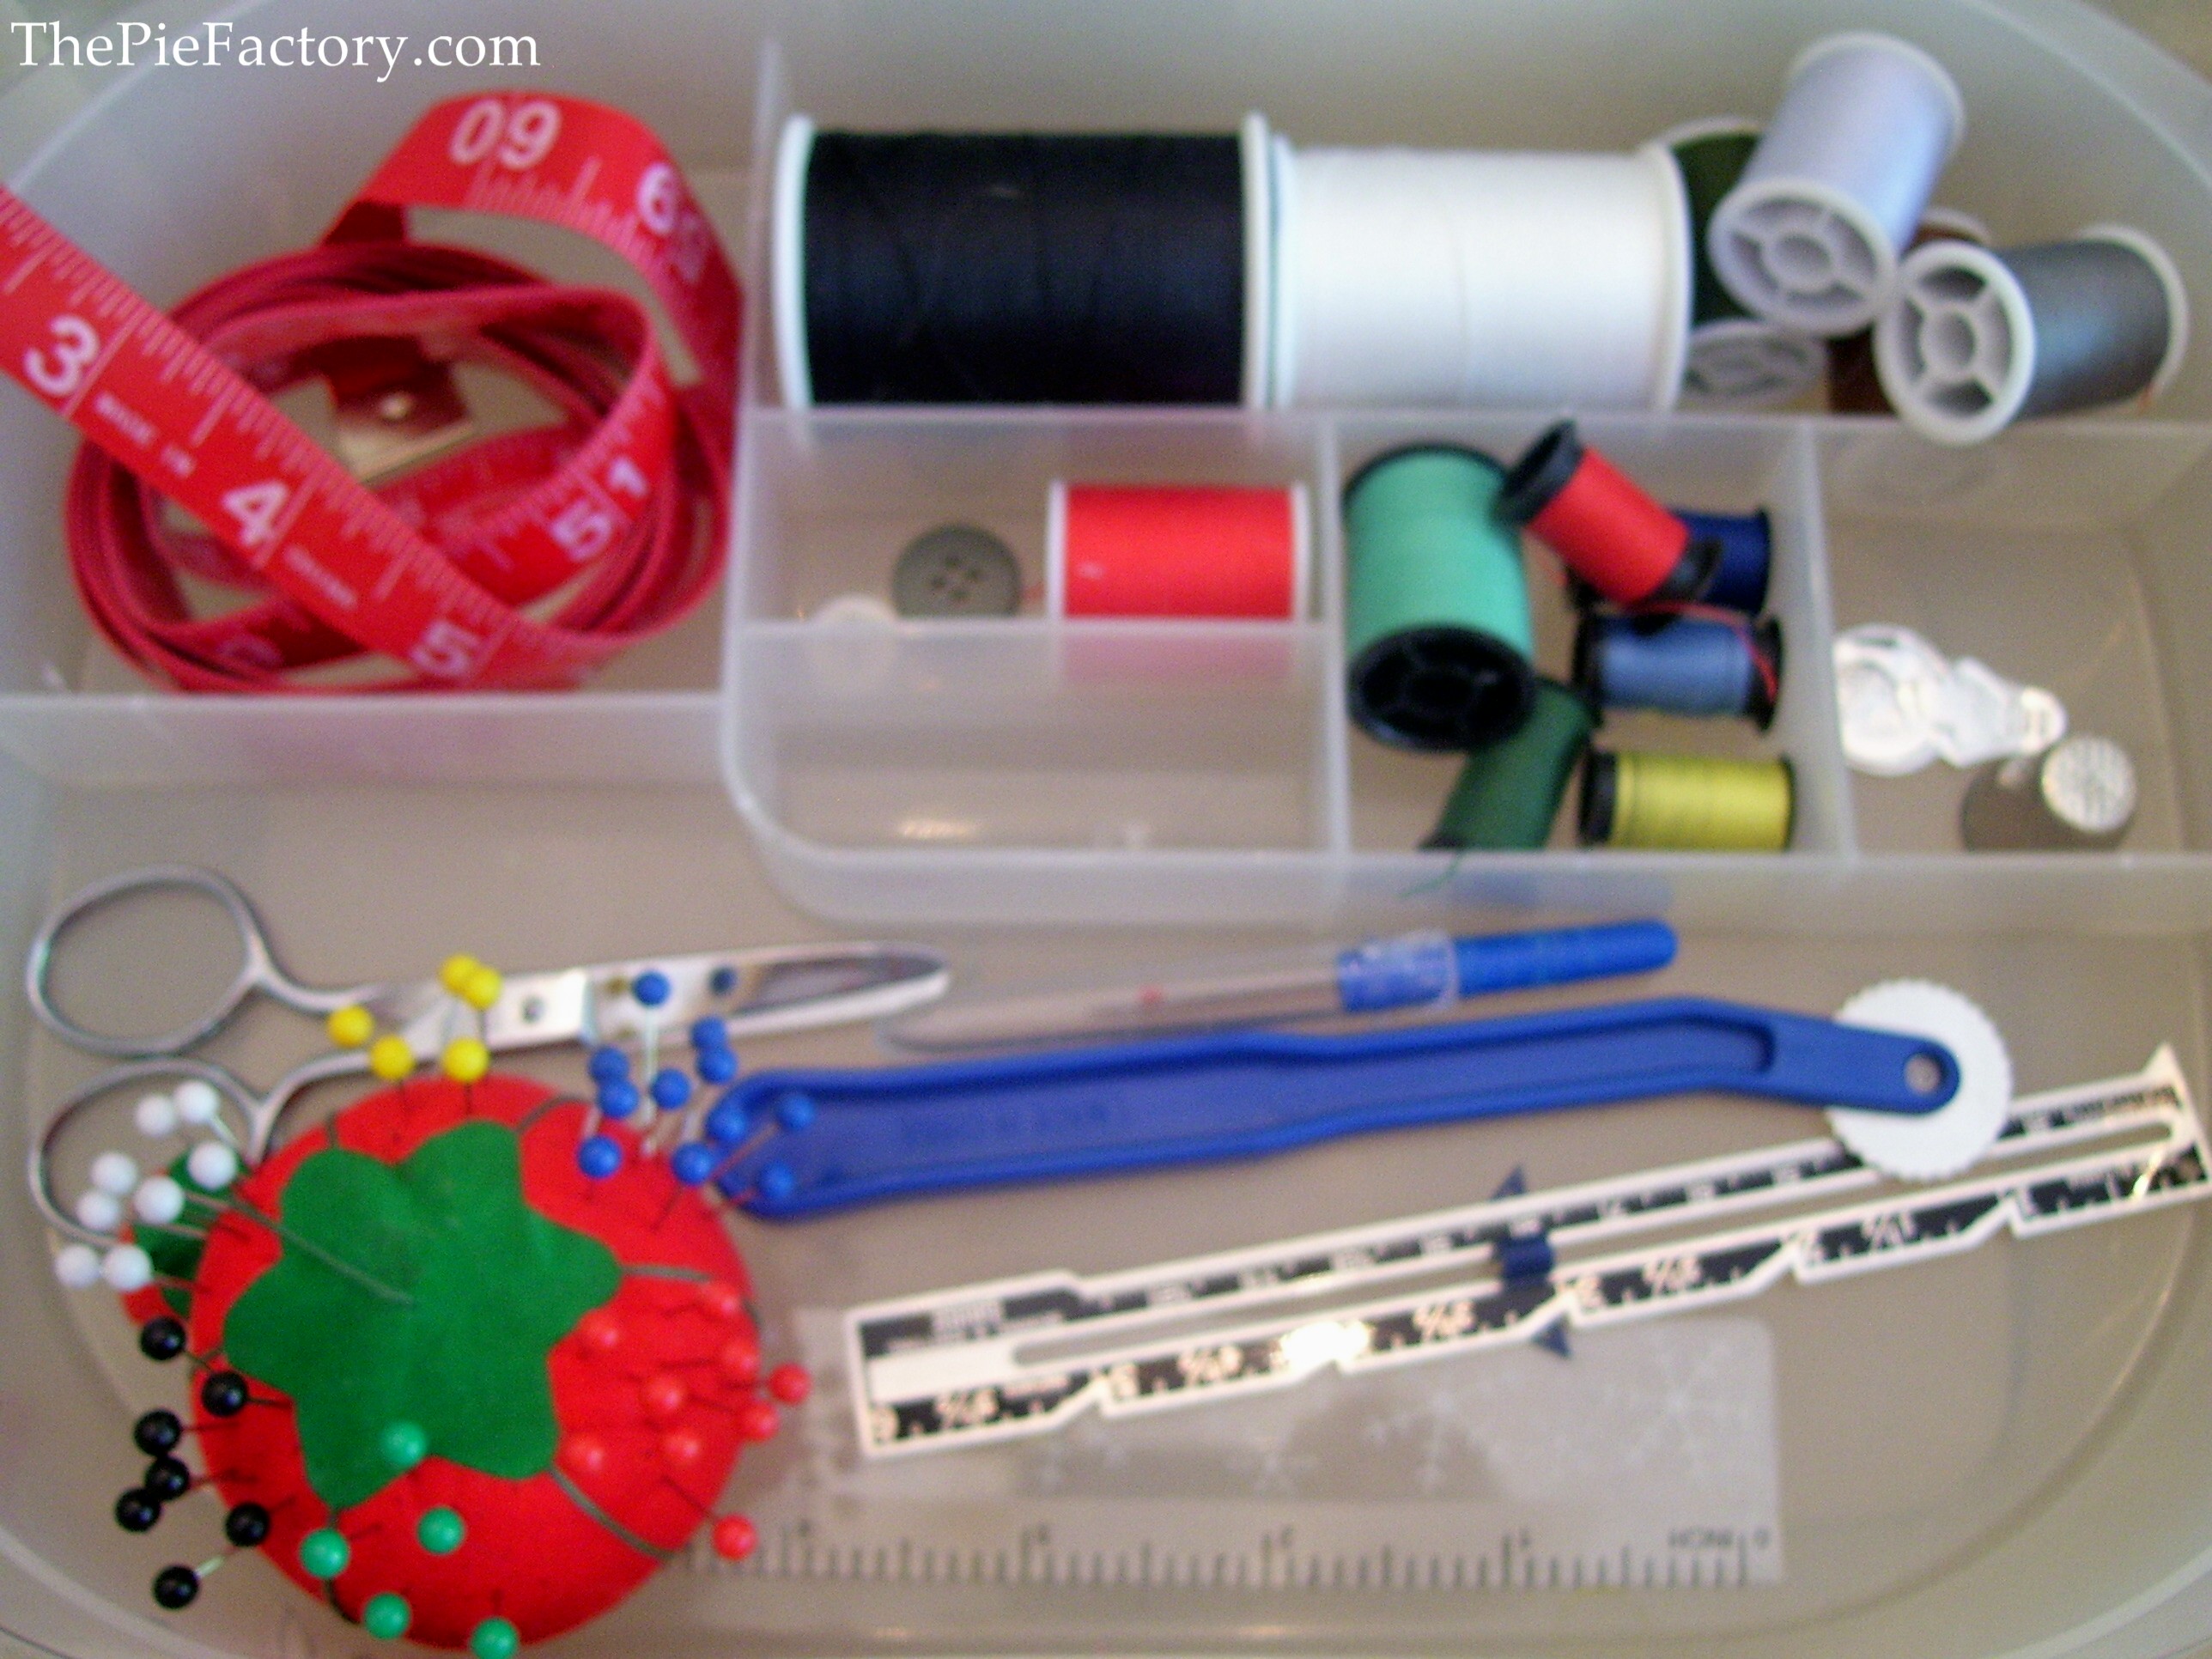 Create a Basic Sewing Kit {a simple DIY project}